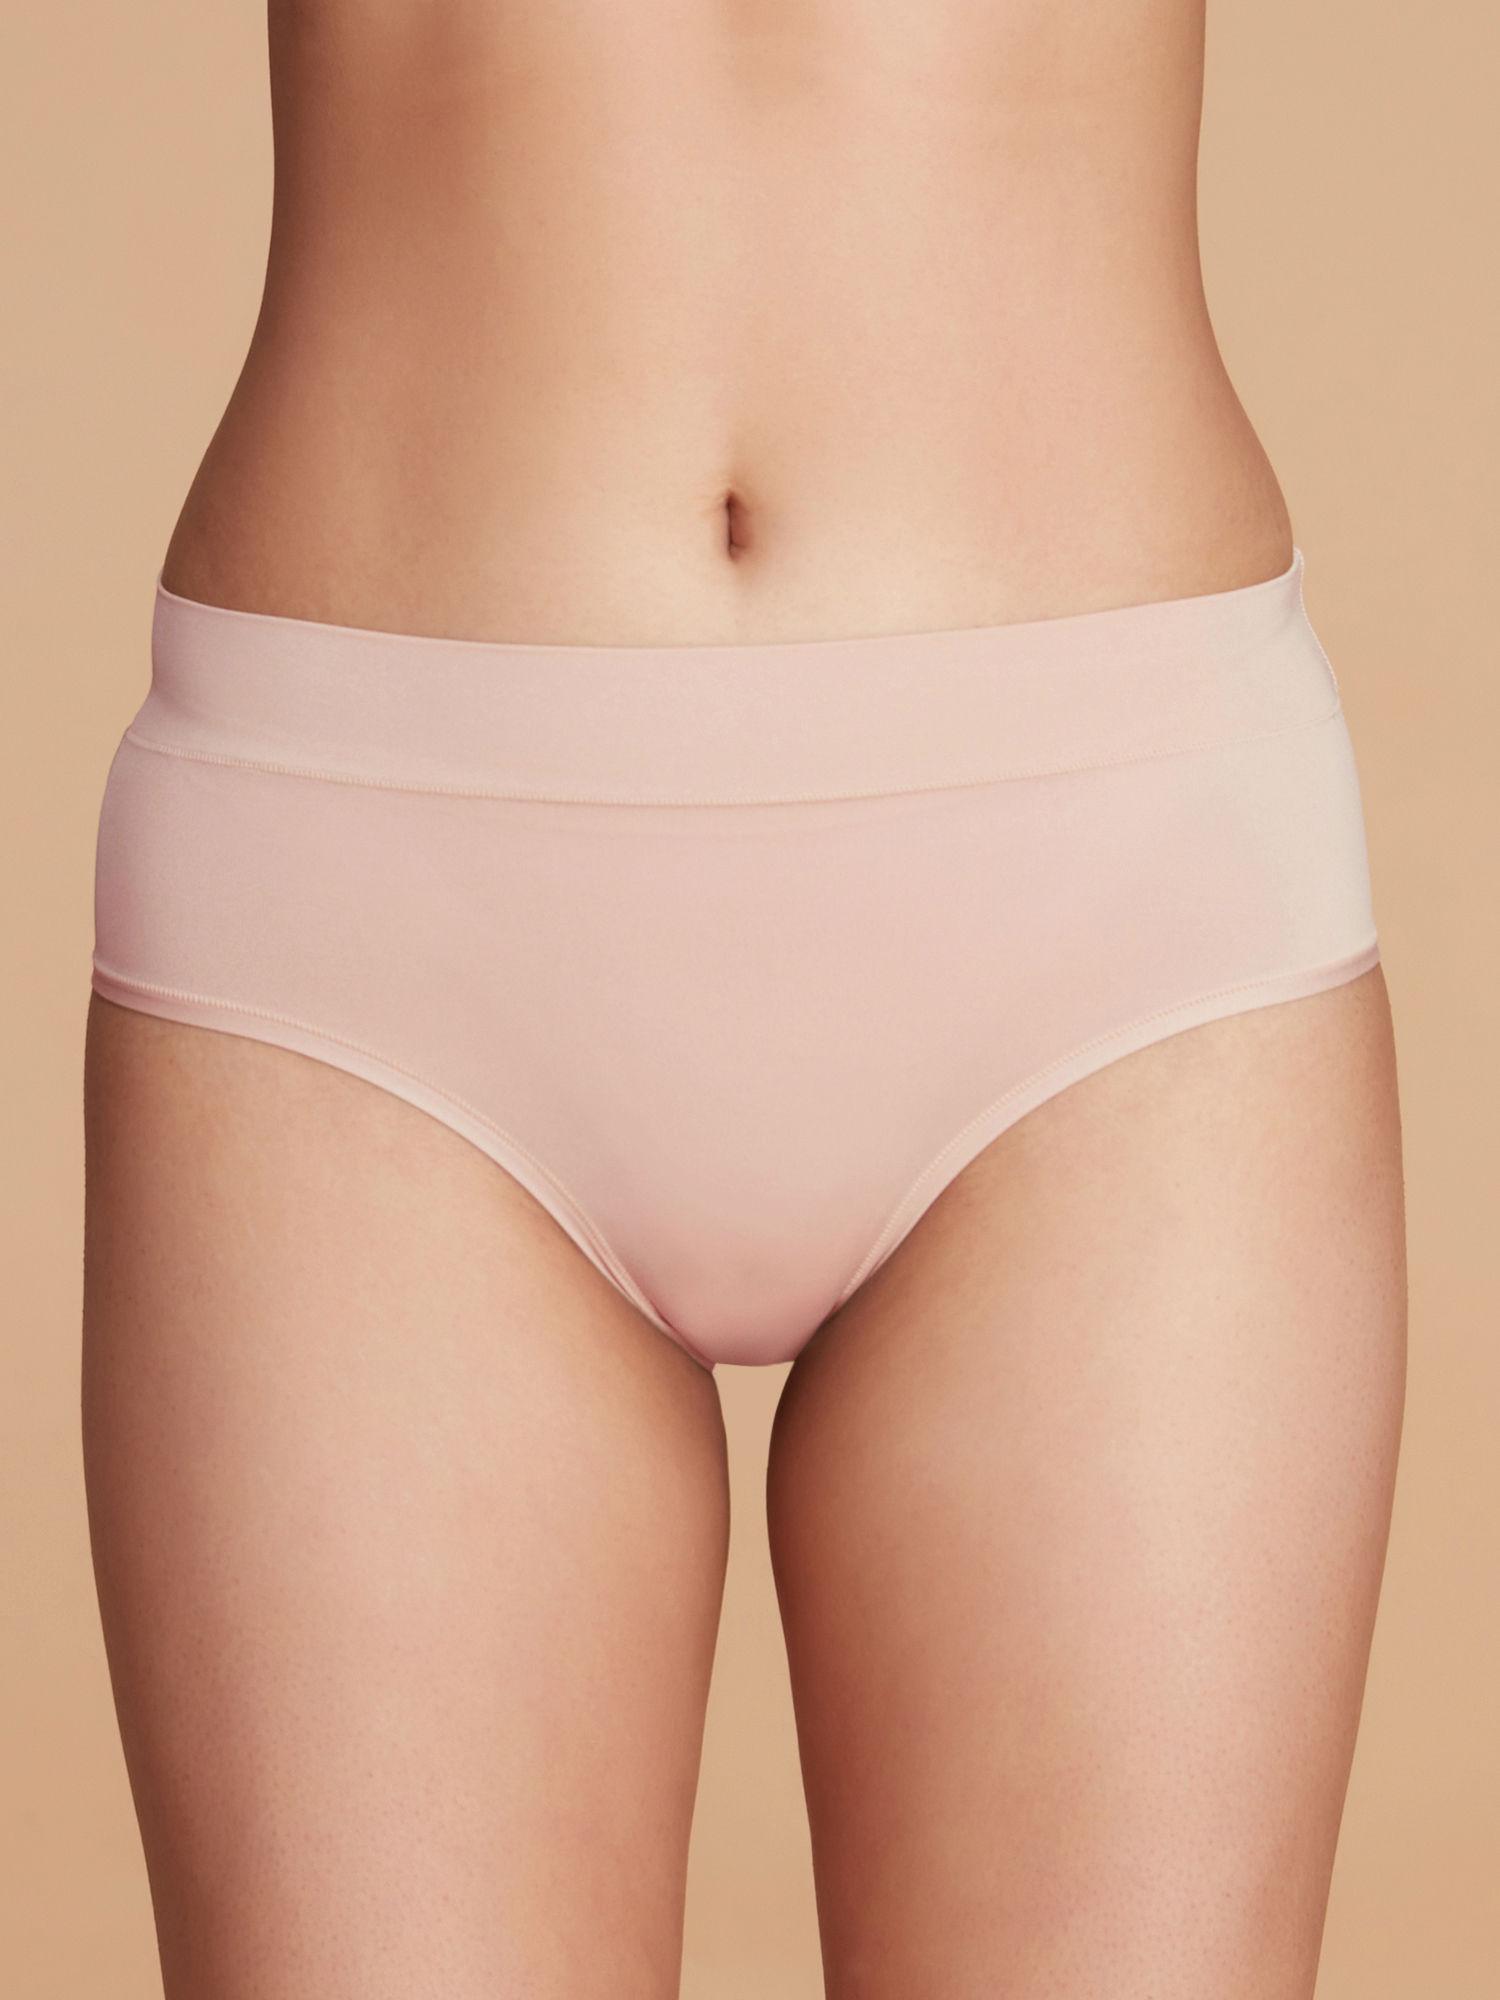 4 way stretch hipster panty - nyp342 - rose